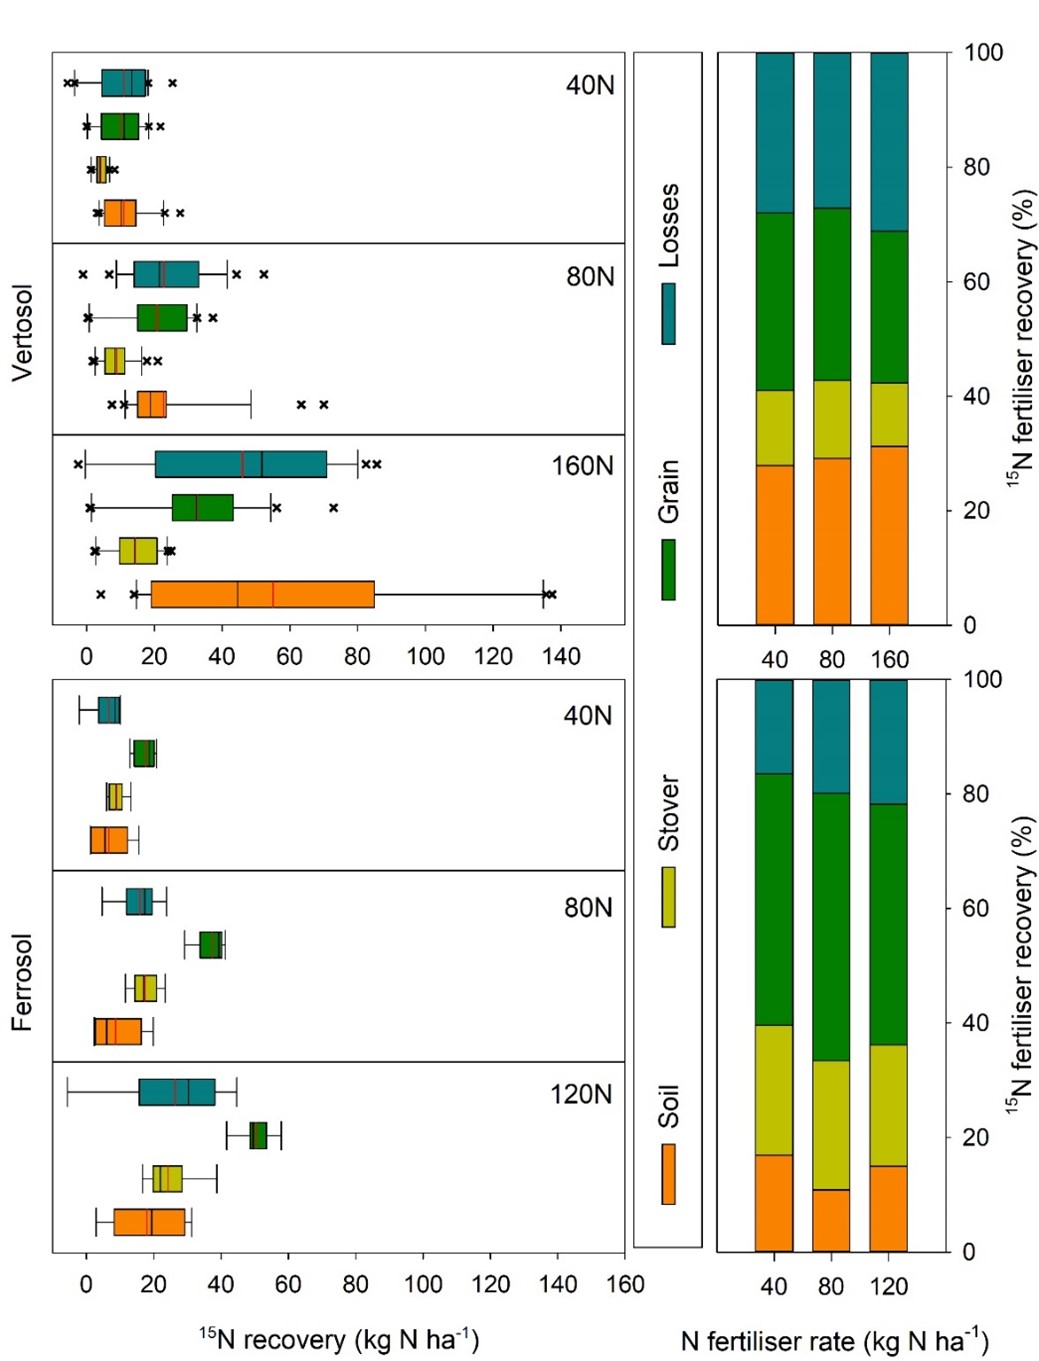 Figure 2 is a column graph and box plot showing ate of applied 15N fertiliser, expressed as both kg 15N ha-1 recovered and as a percentage of total 15N applied for different N fertiliser rates applied in 4 farmer field sites and in 5 experiments conducted on research stations at Kingaroy (red ferrosol) and Kingsthorpe (black vertosol) from 2012–2014.